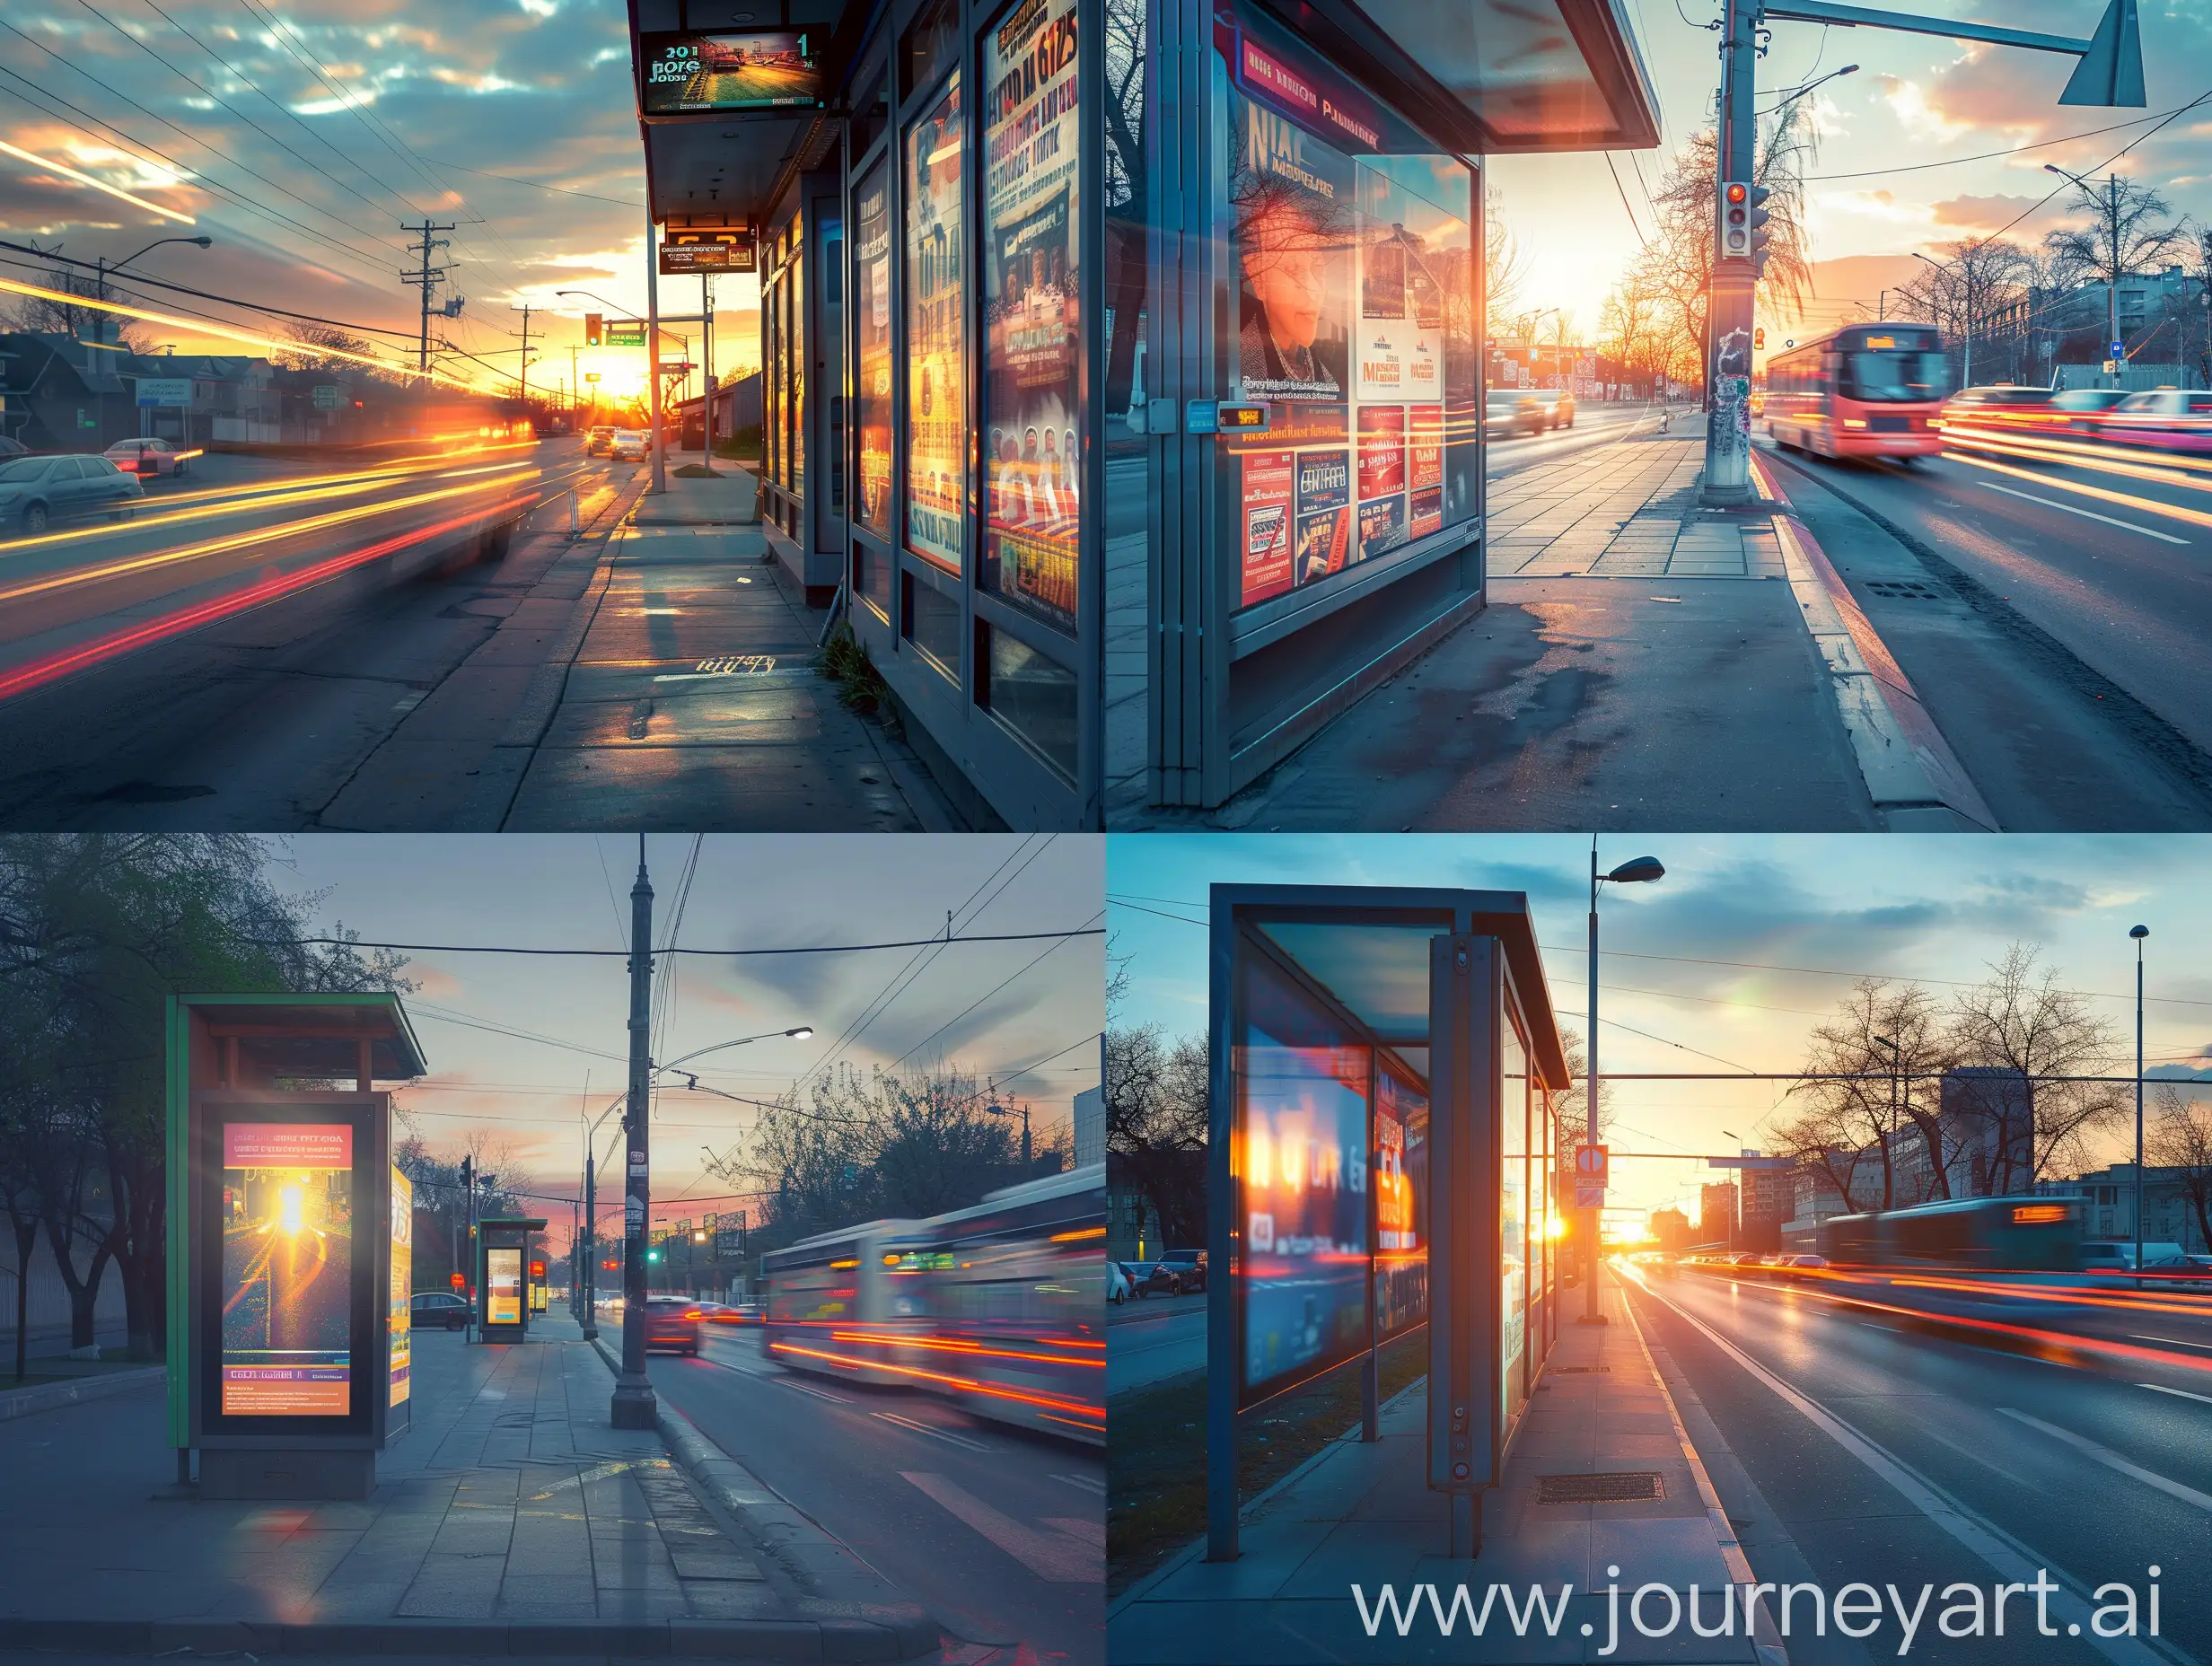 street panel ads in a street cars passing by in the background, long exposure, sunset light, Highly detailed,  high quality